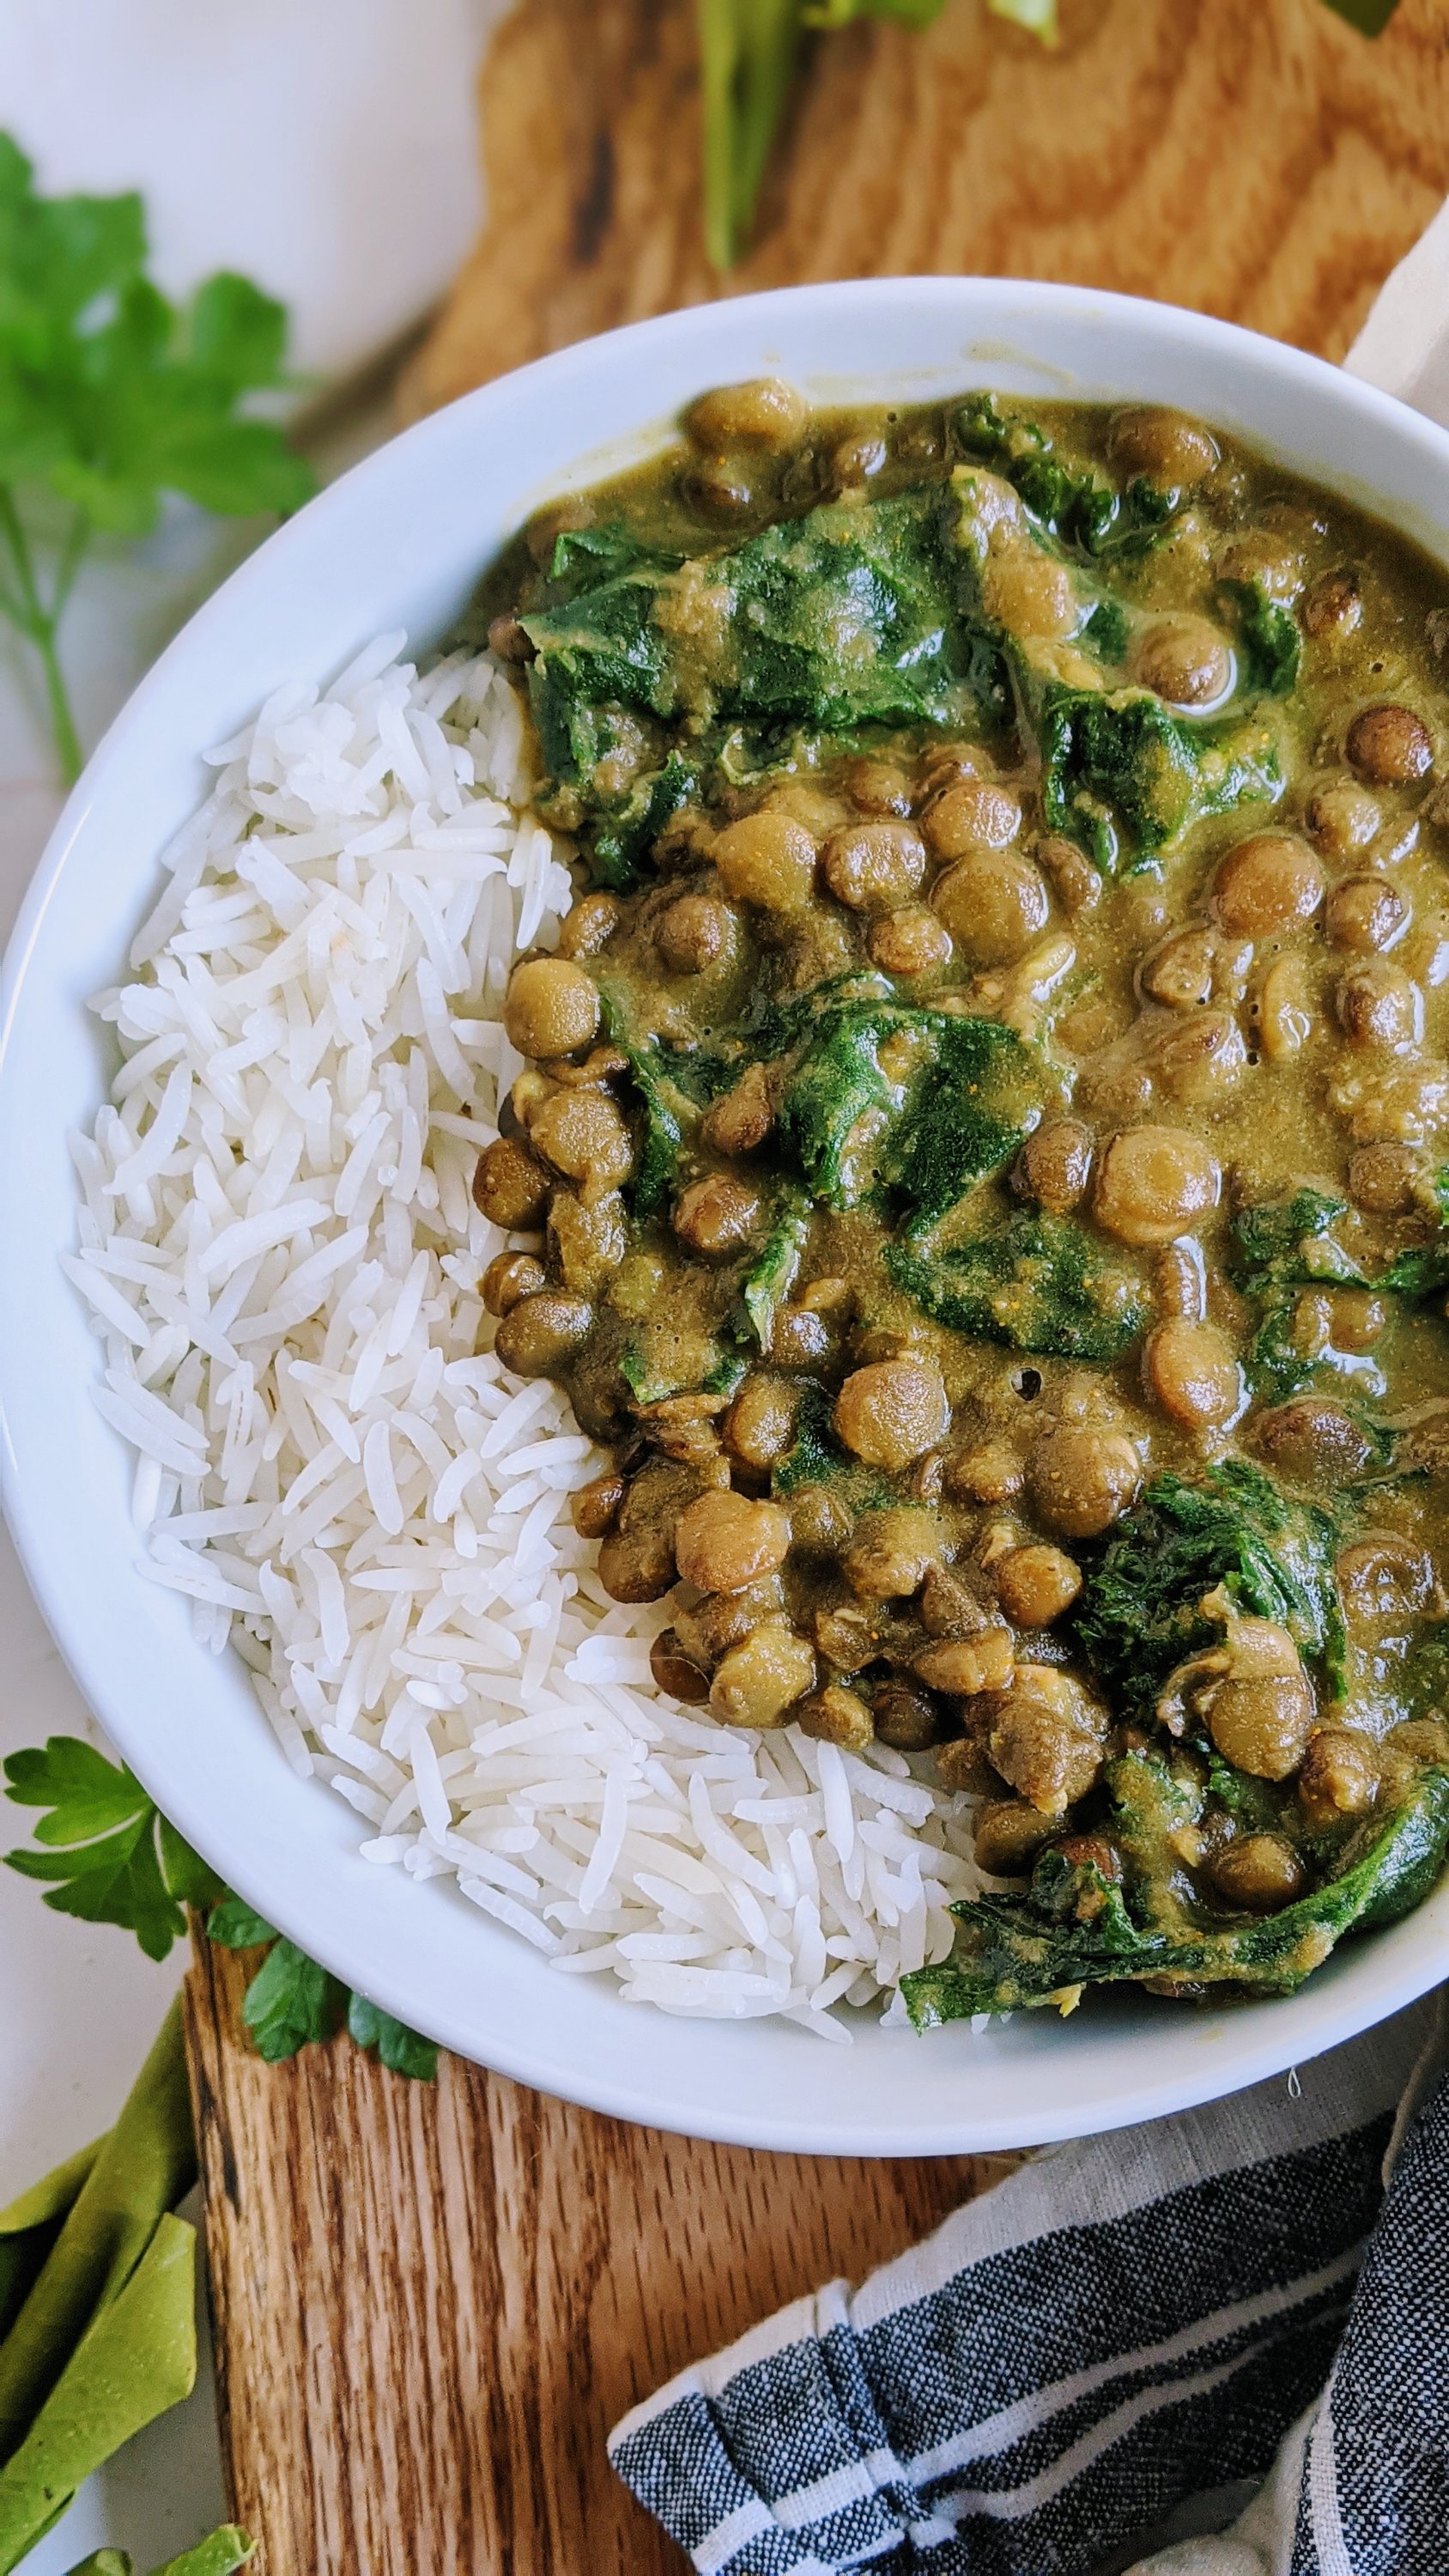 curried lentils recipe vegan gluten free healthy high protein lentil curry coconut milk recipes non dairy free curries with lentils and kale or spinach saag or kale